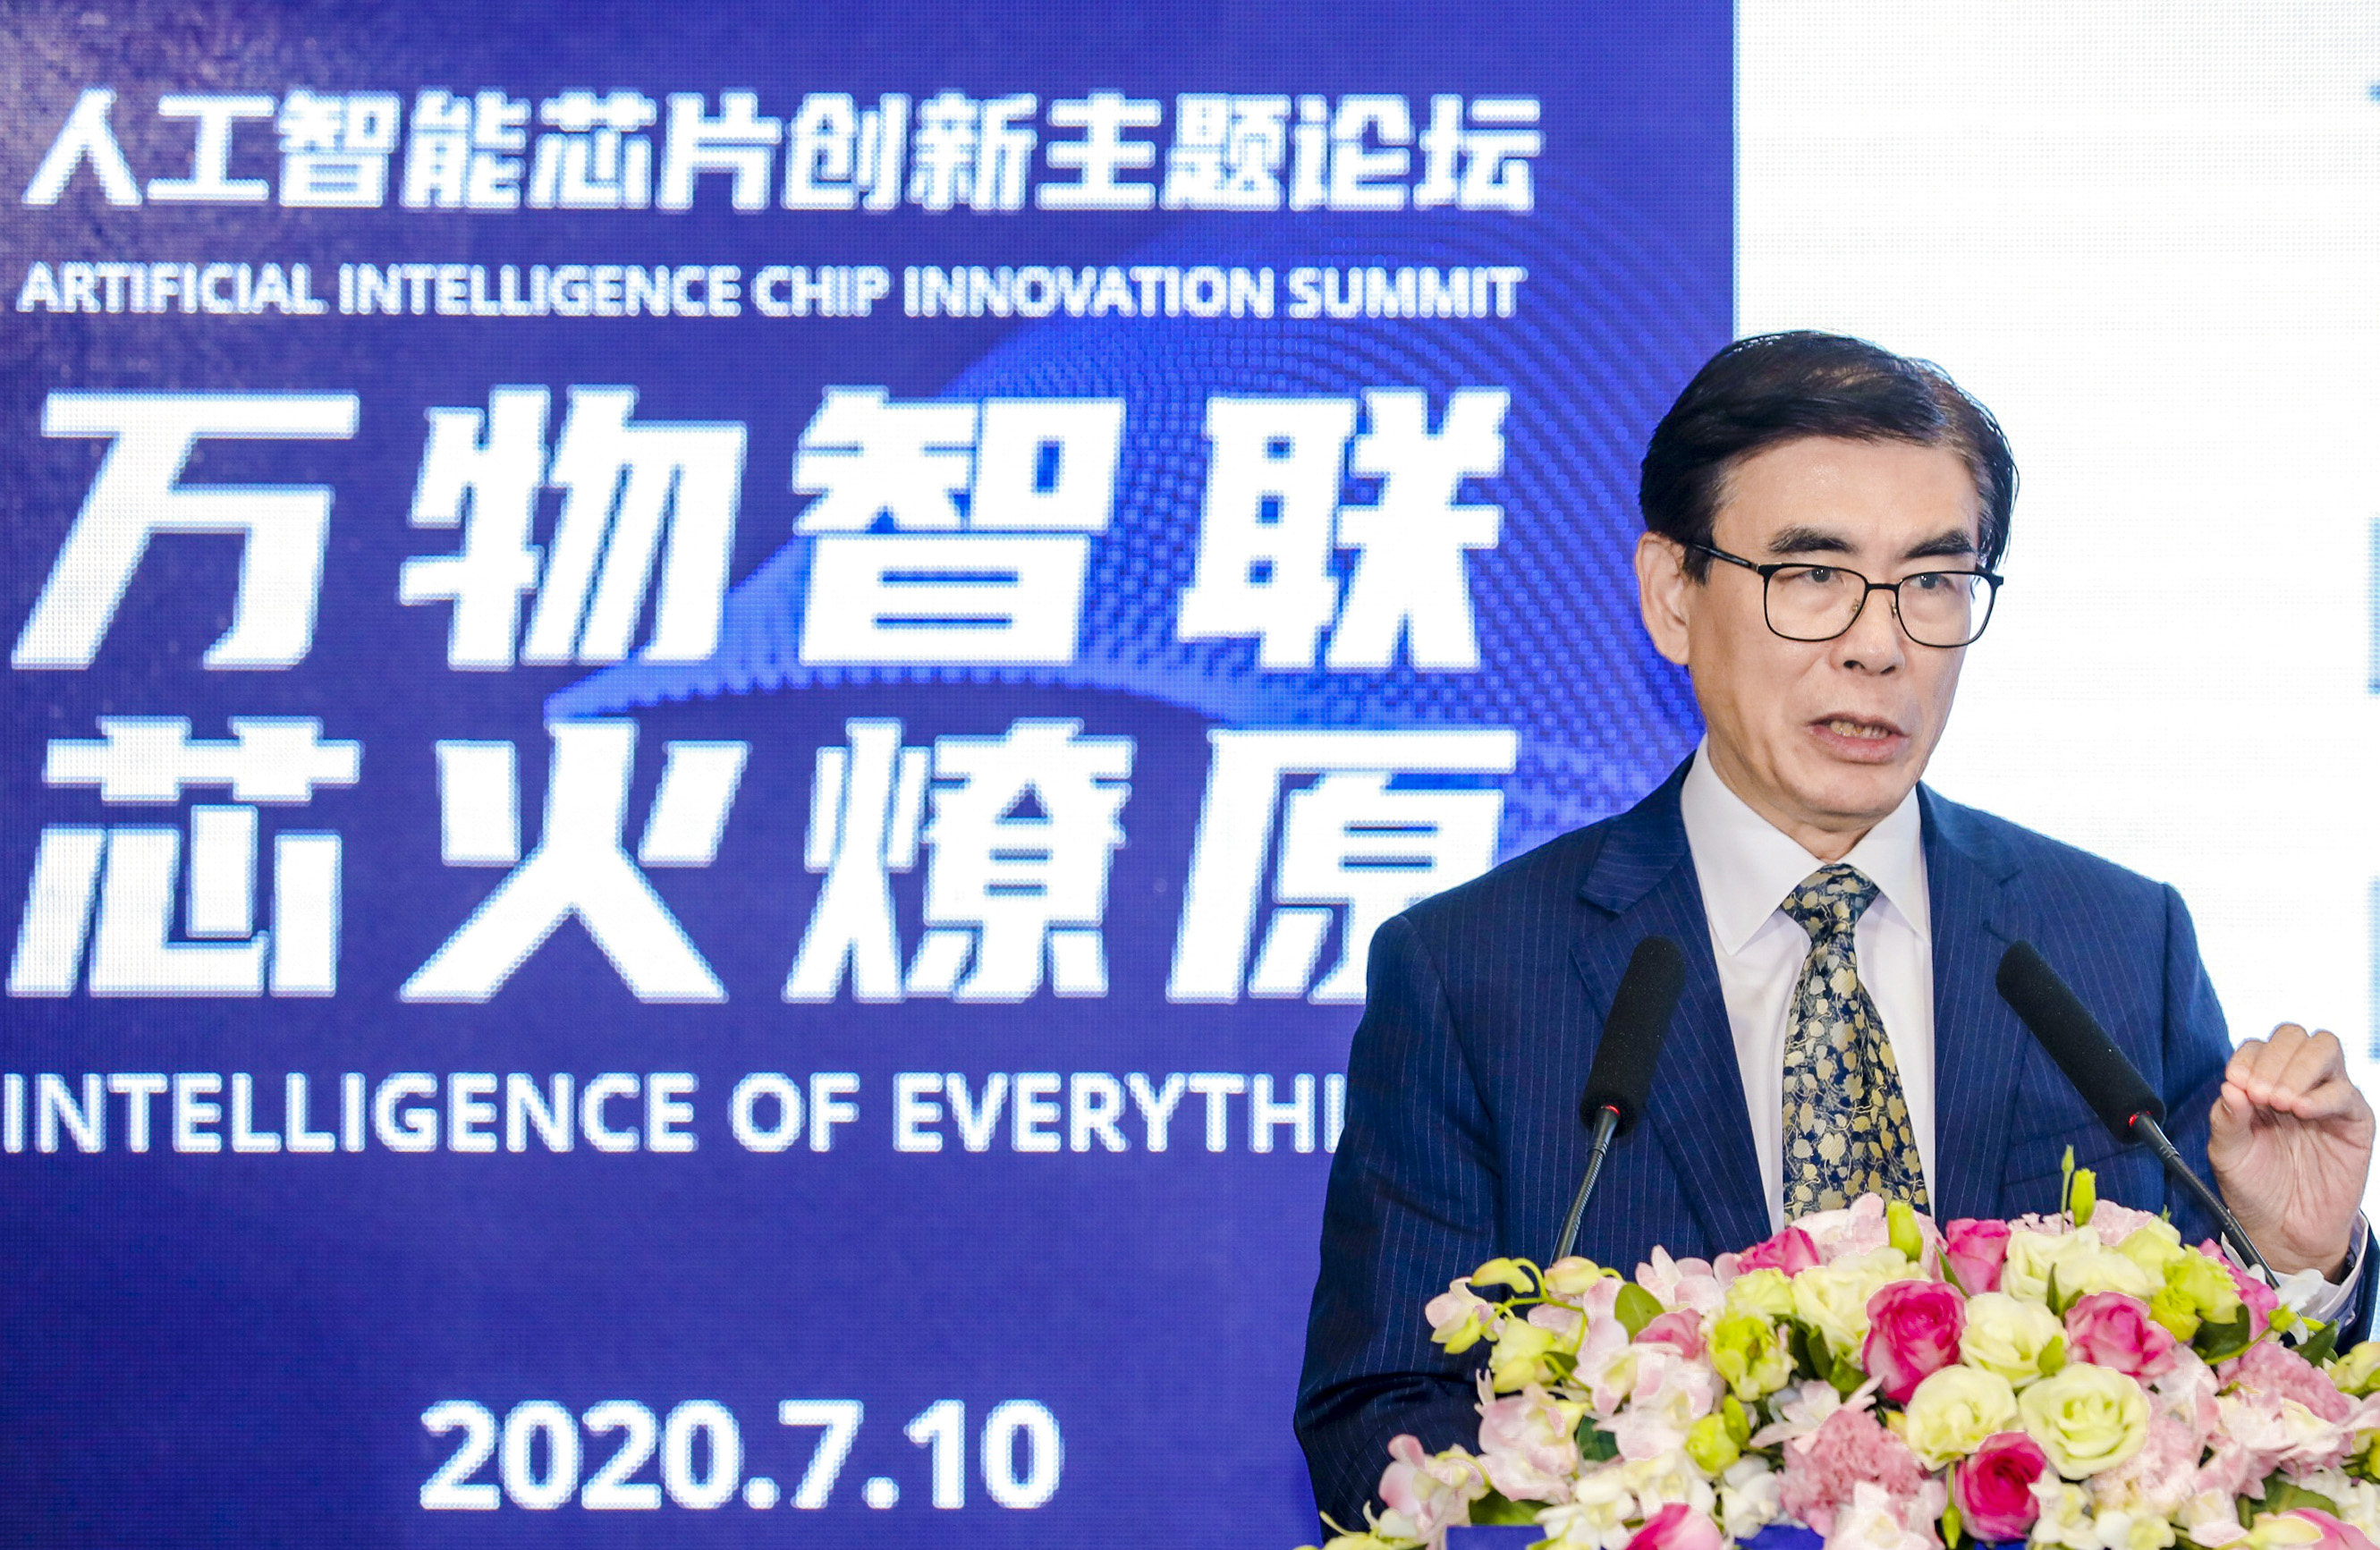 Wei Shaojun gives a speech during the World Artificial Intelligence Conference (WAIC) in Shanghai in 2020. Photo: Handout